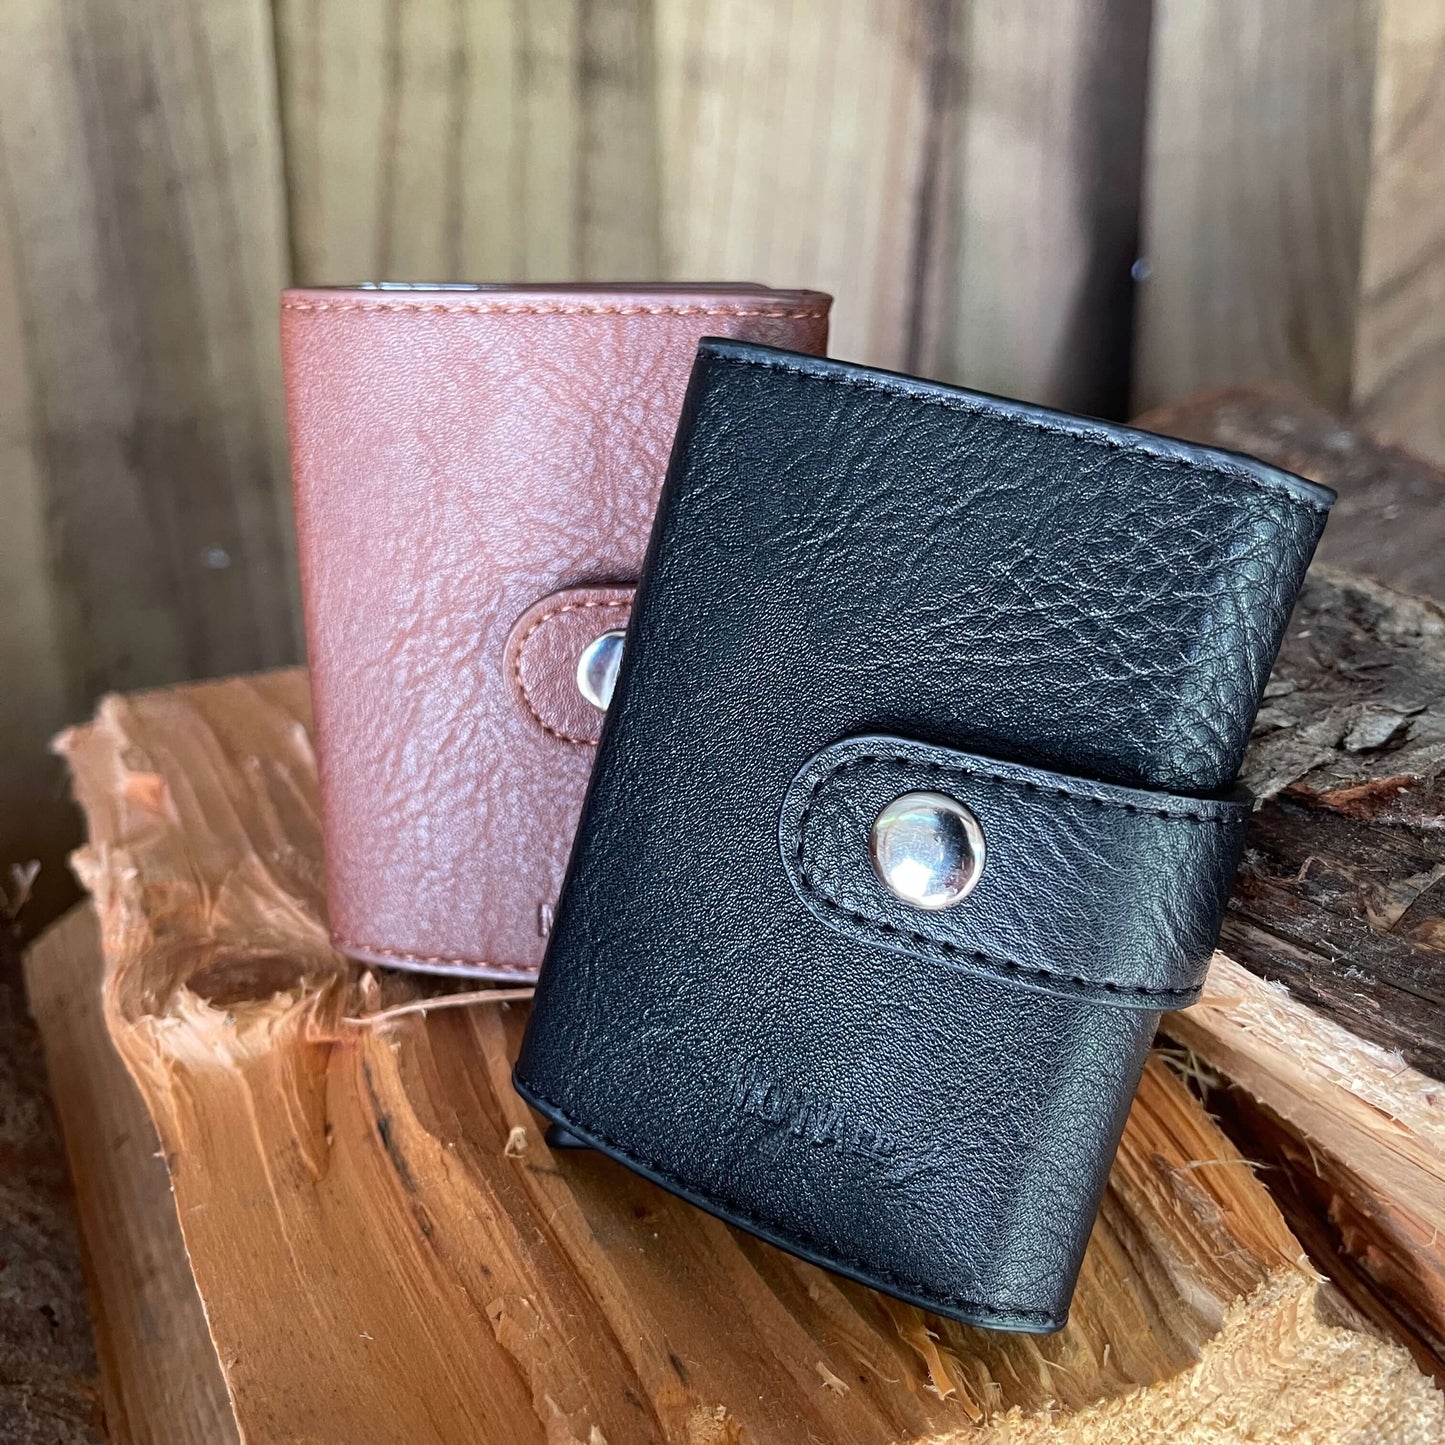 Small pocket wallets in tan & black sitting on a piece of firewood.